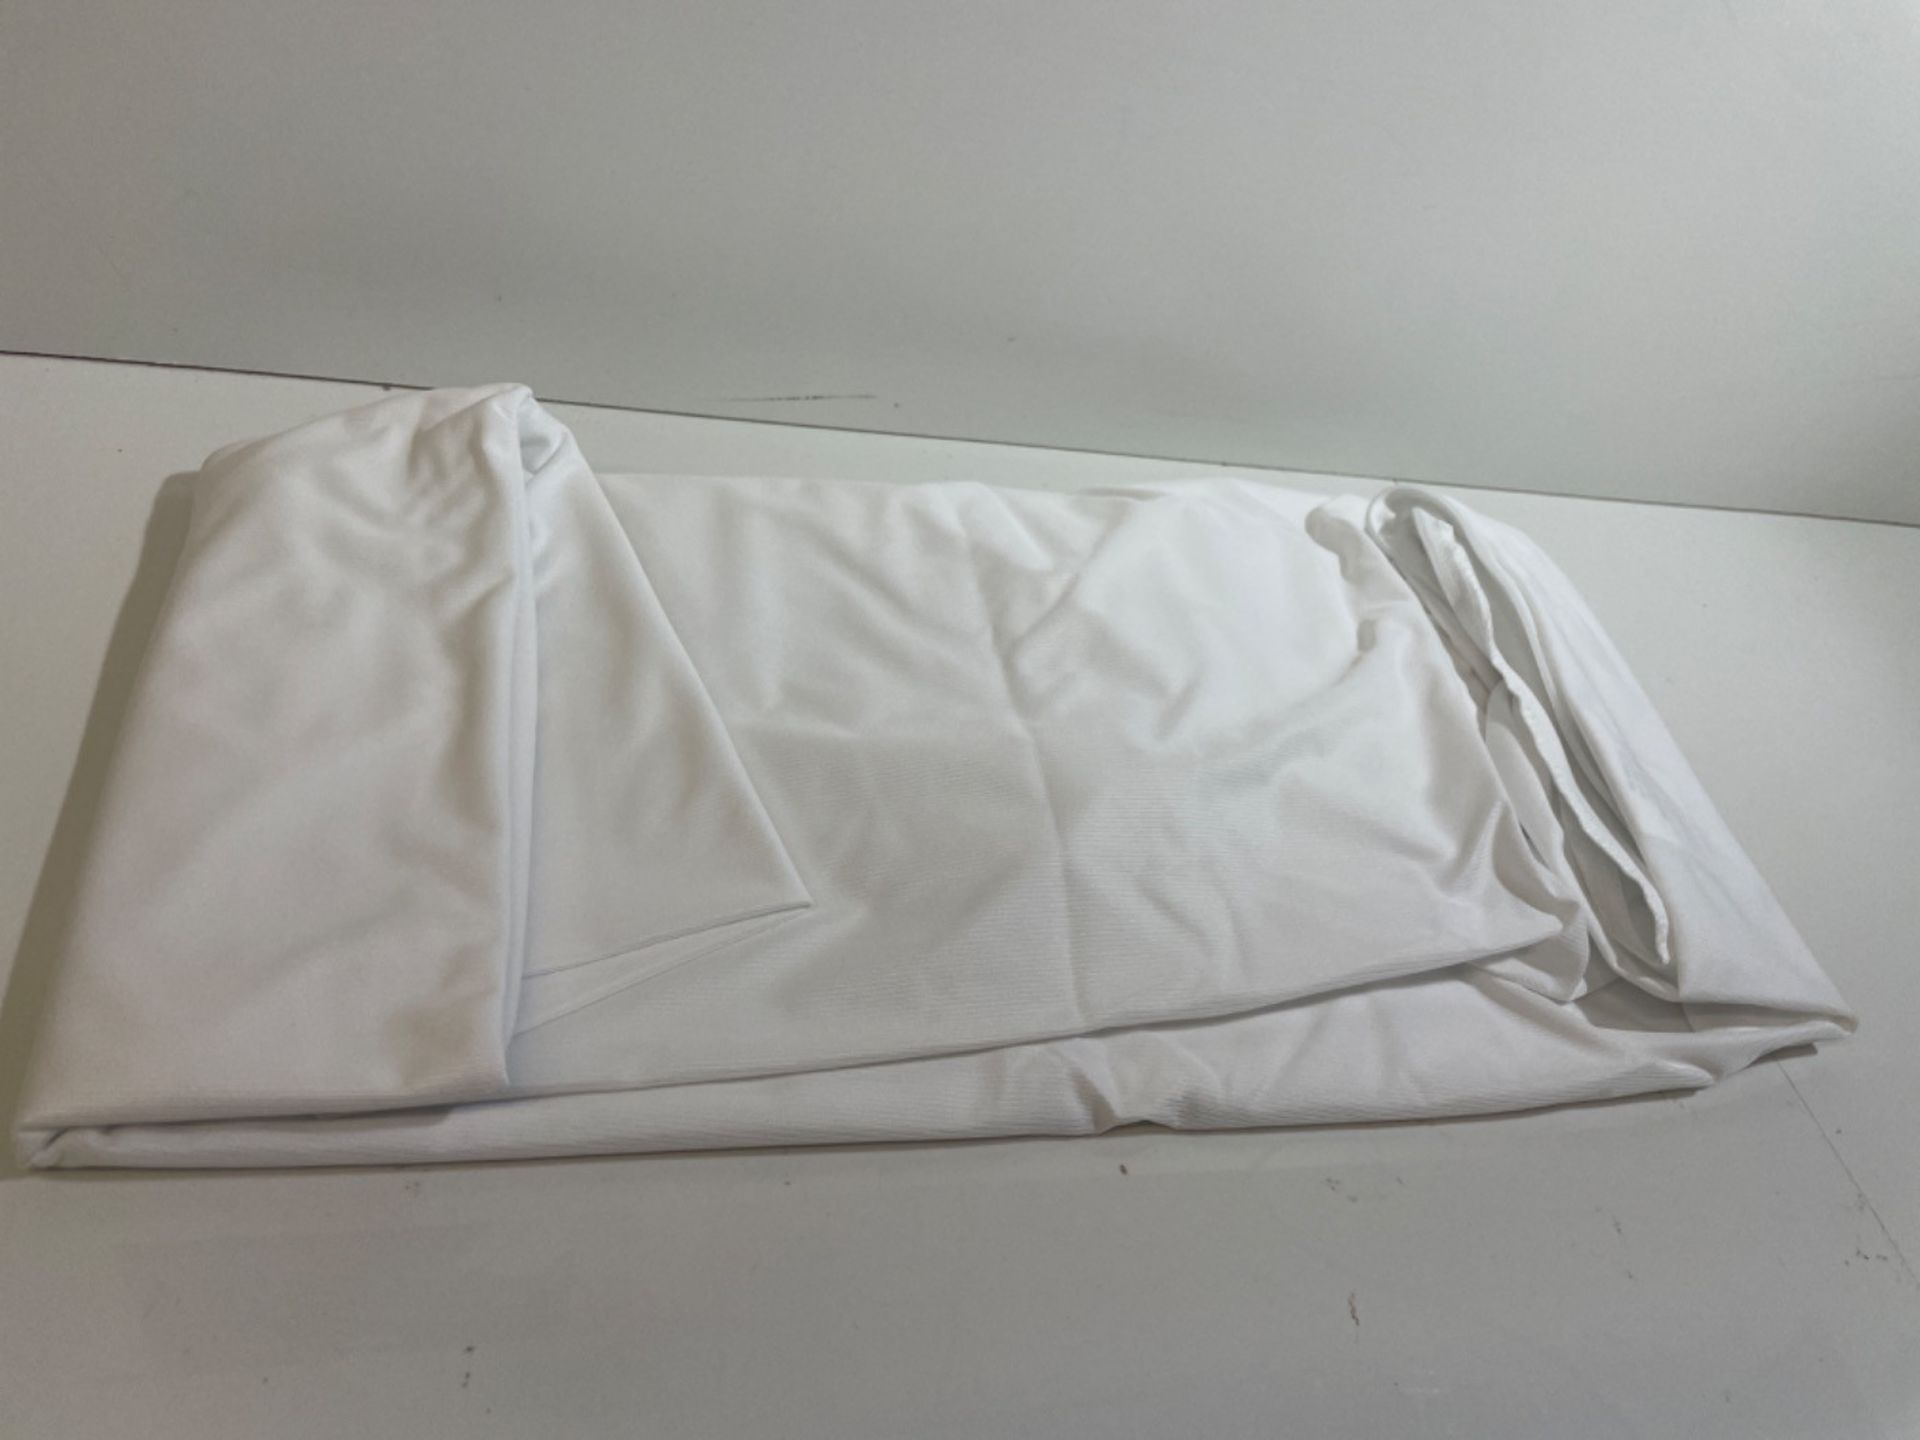 Velfont Anti-dust mite and Anti-bedbugs zipped mattress cover, waterproof and breathable | Anti-all - Image 2 of 3